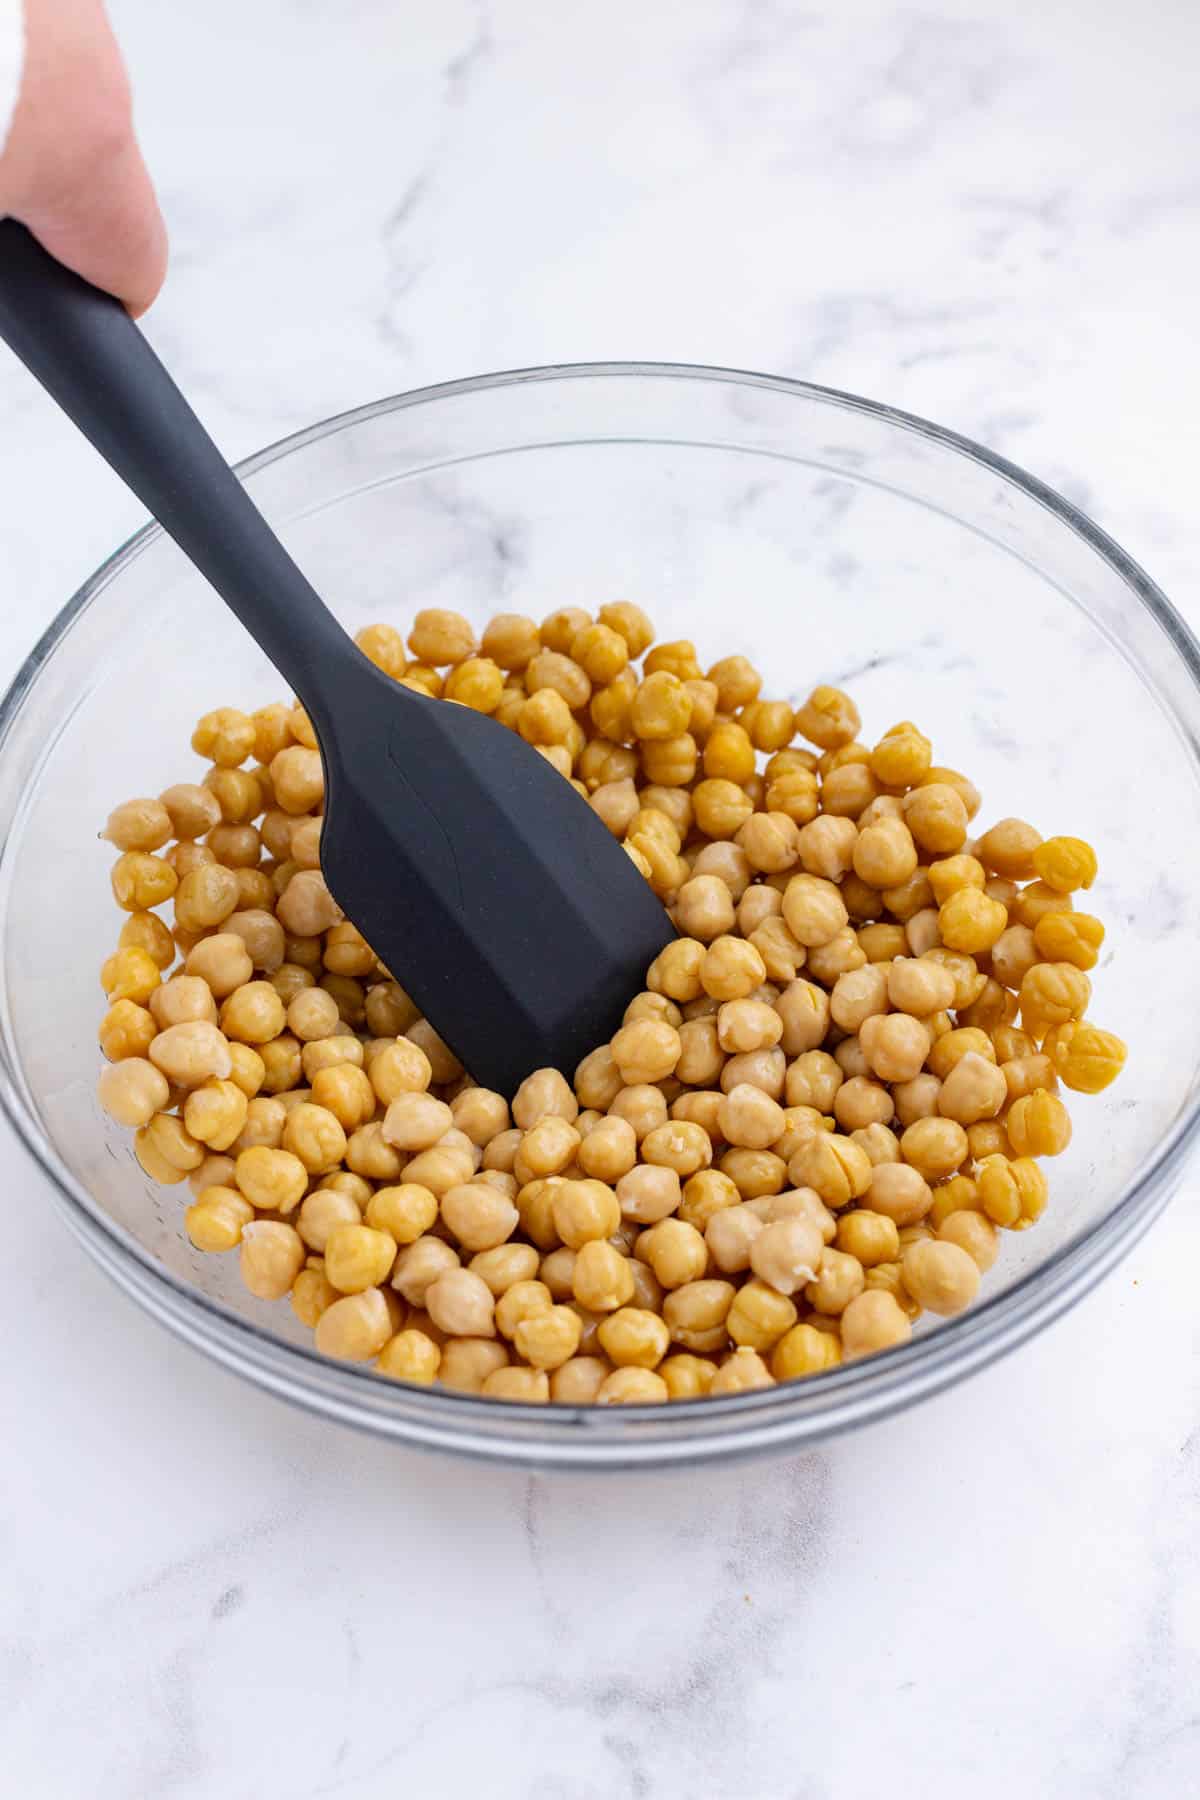 Toss to cover the chickpeas in oil.